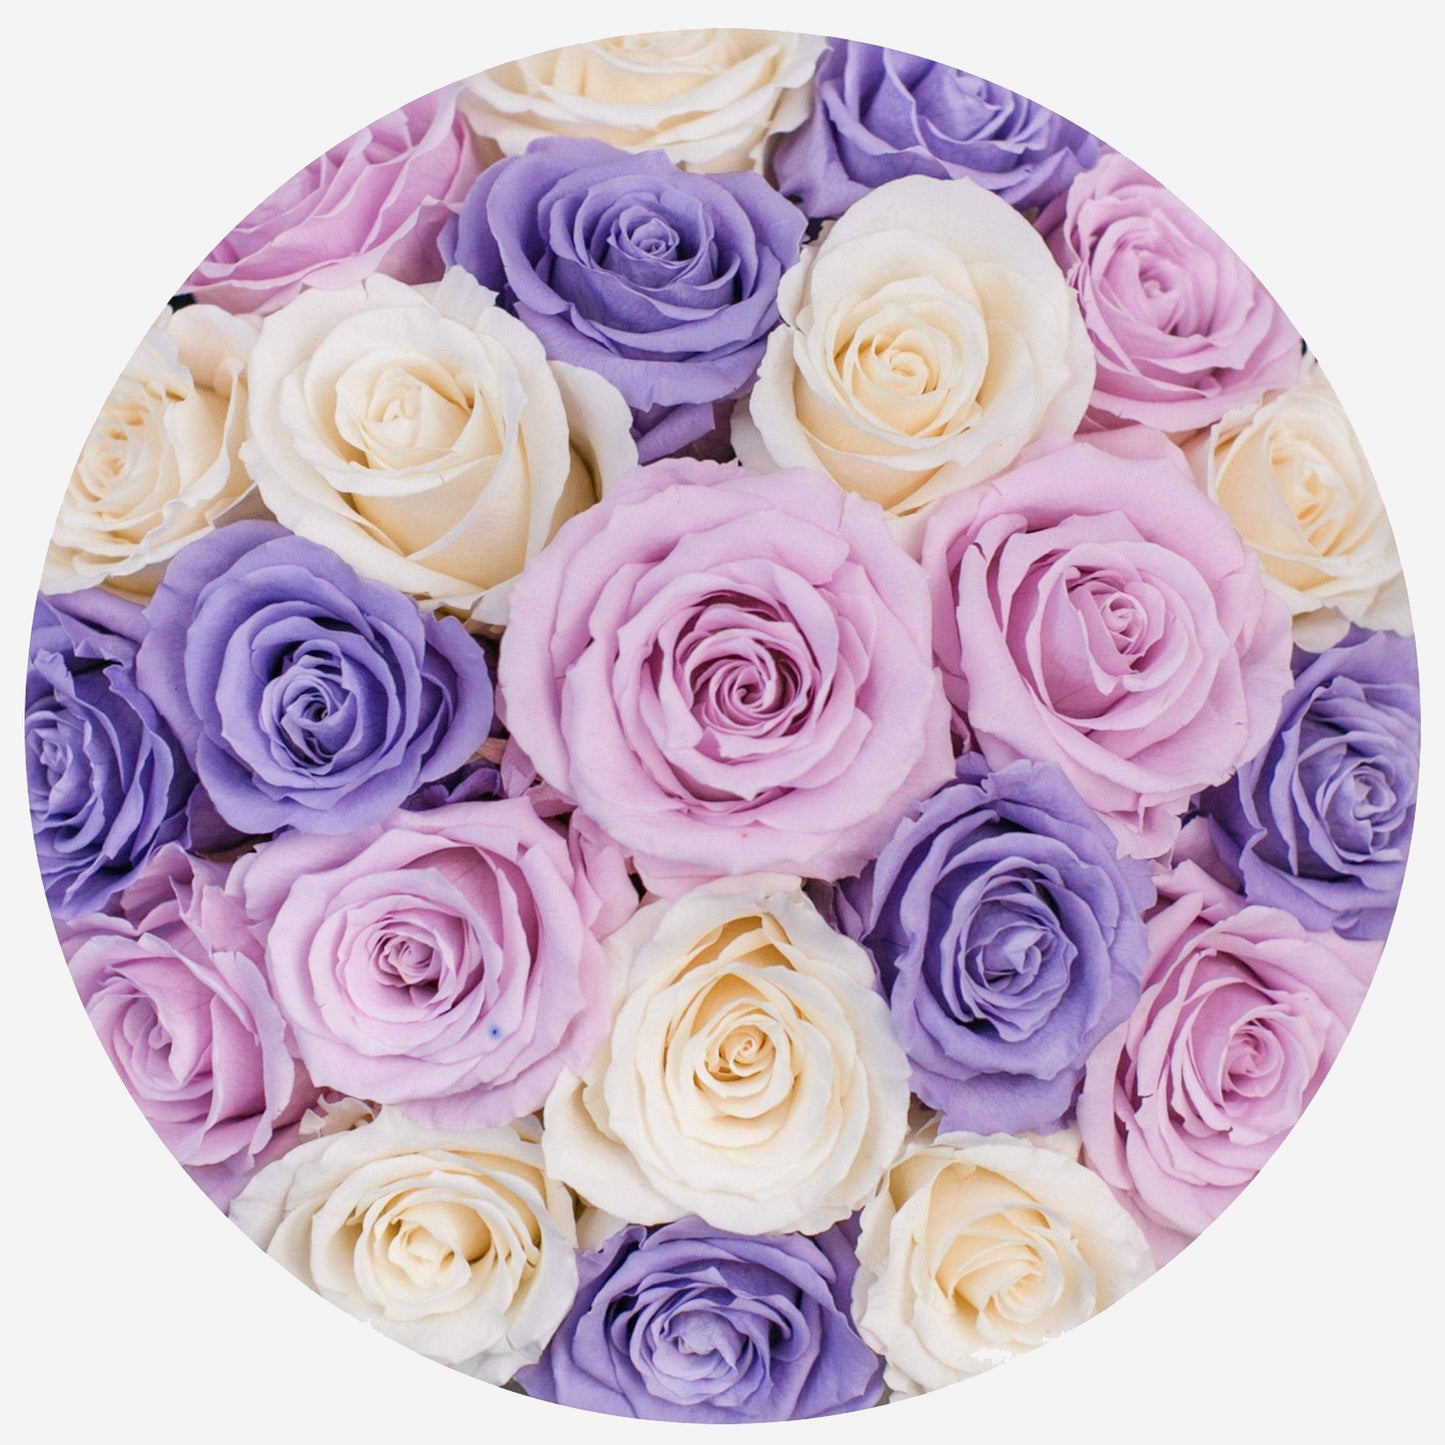 Classic Light Pink Suede Dome Box | Violet & Ivory & Pink Roses - The Million Roses